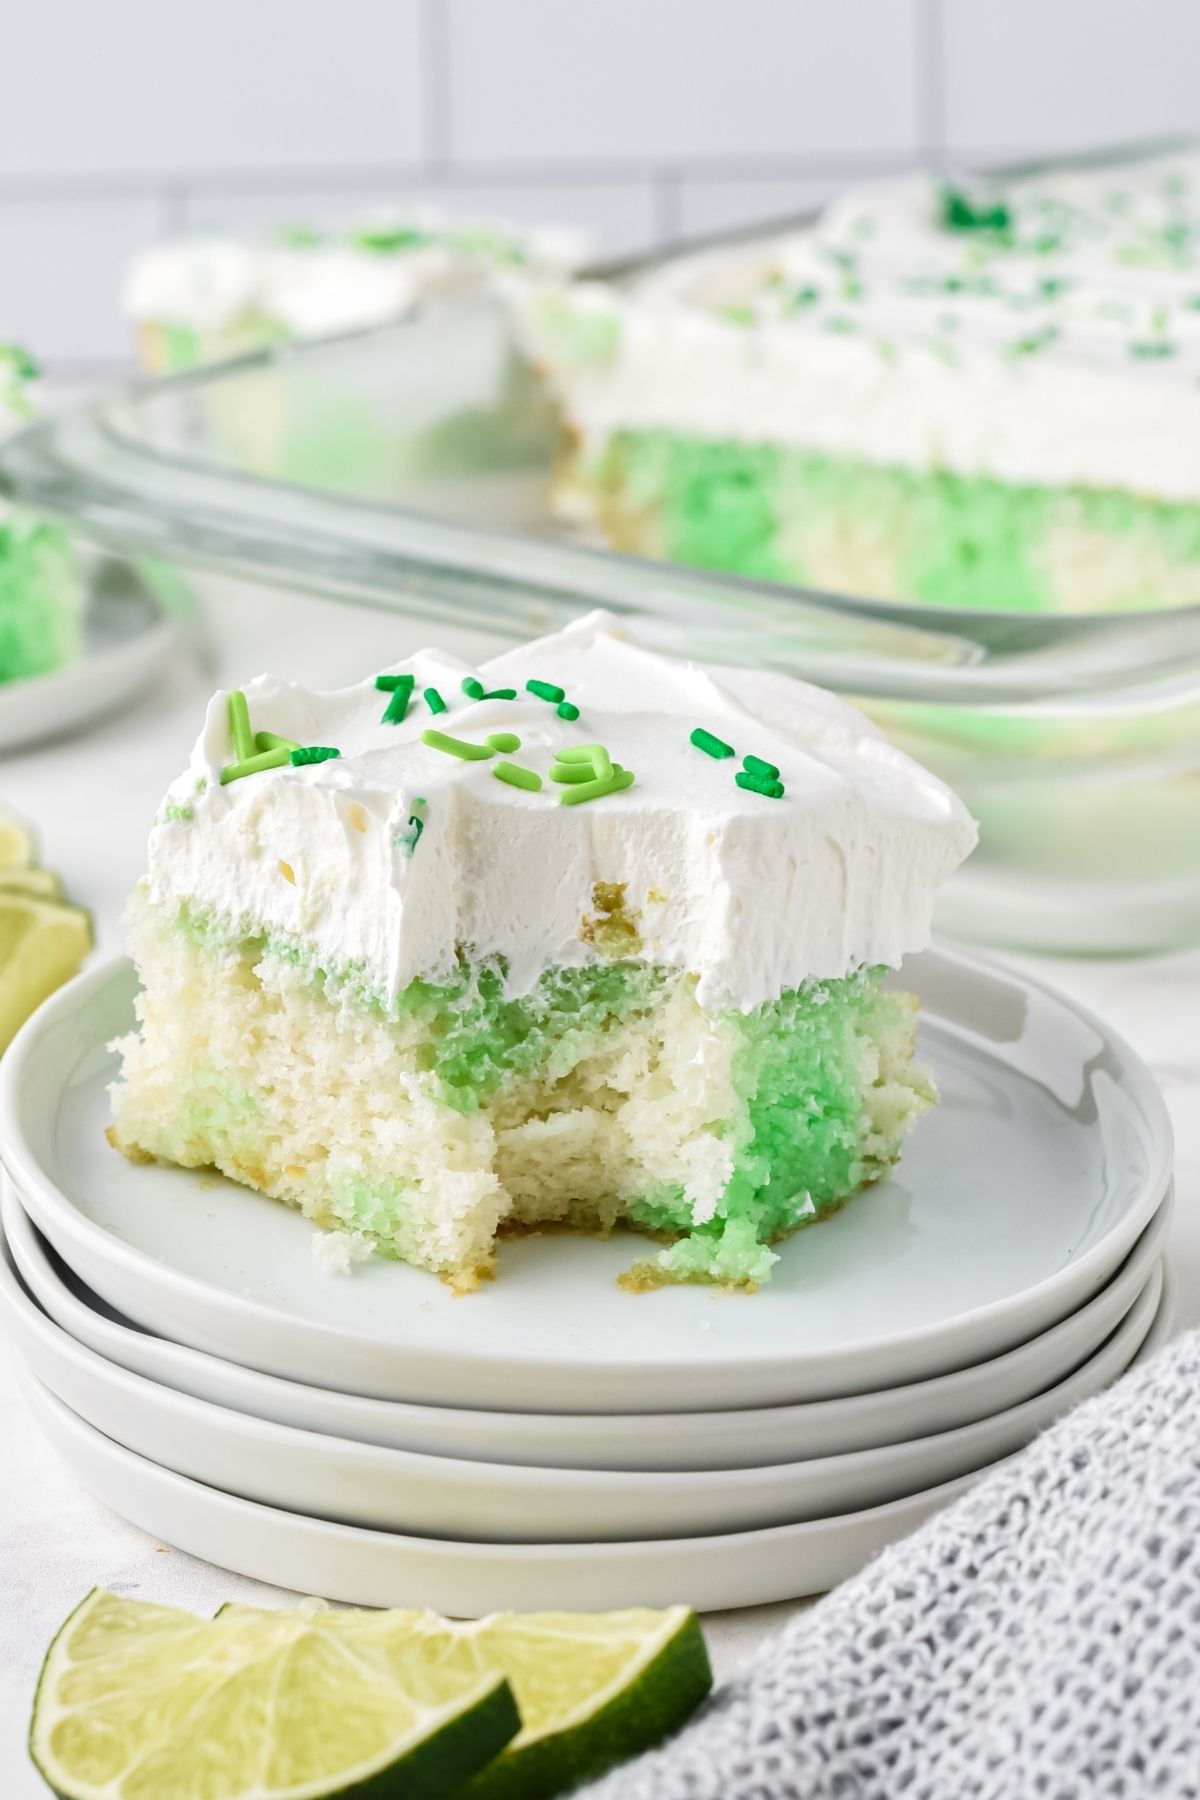 green and white cake with whipped cream topping and green sprinkles